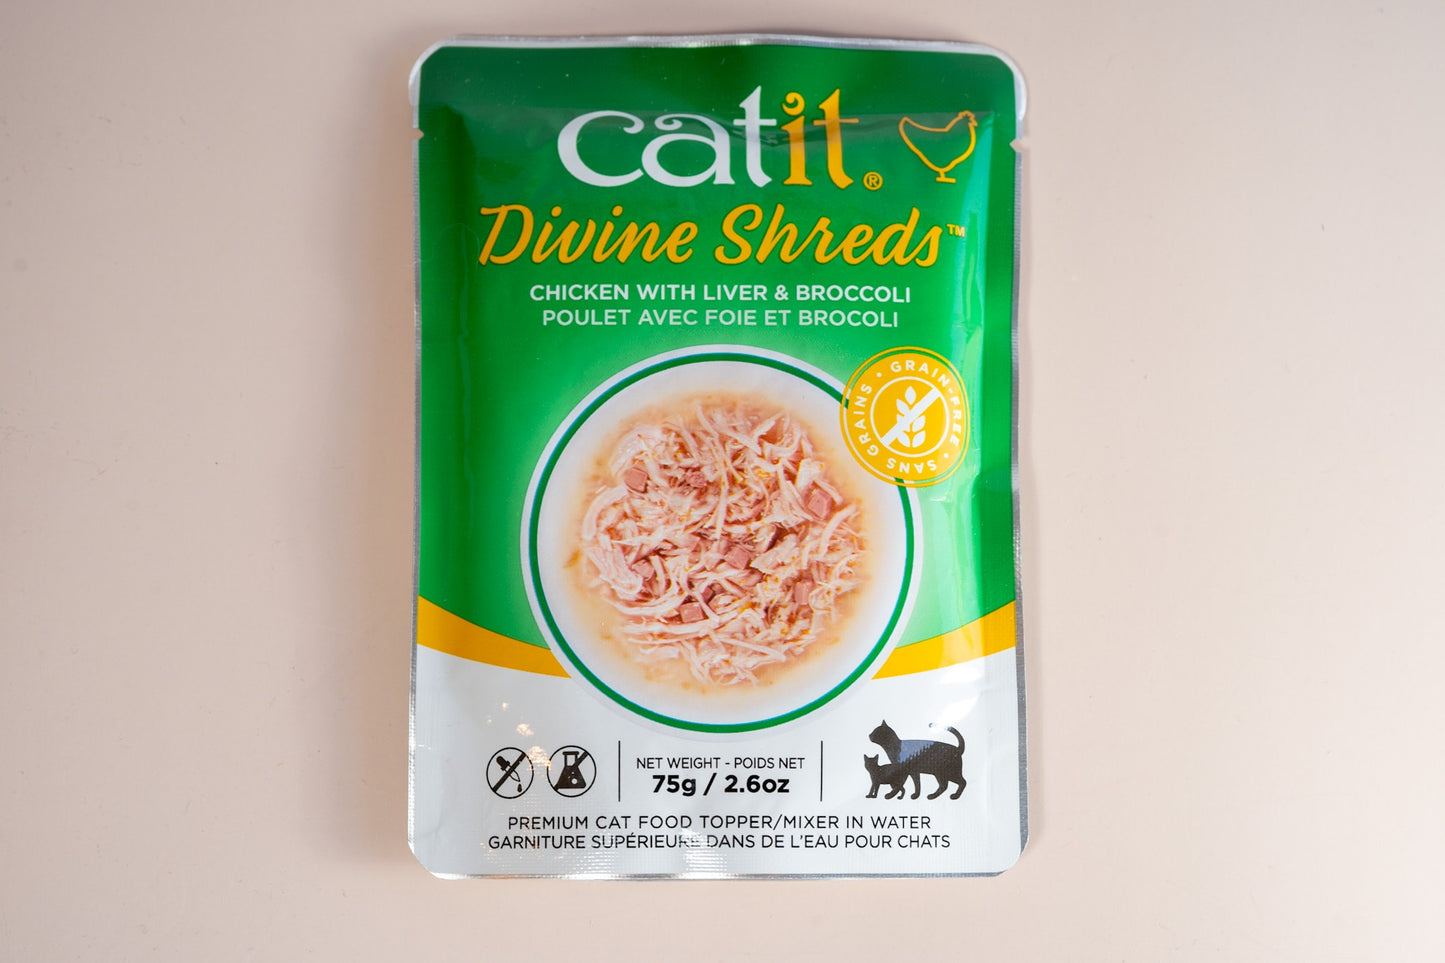 Front view of the Catit Divine Shreds food tooper in water with chicken, liver and broccoli flavor.